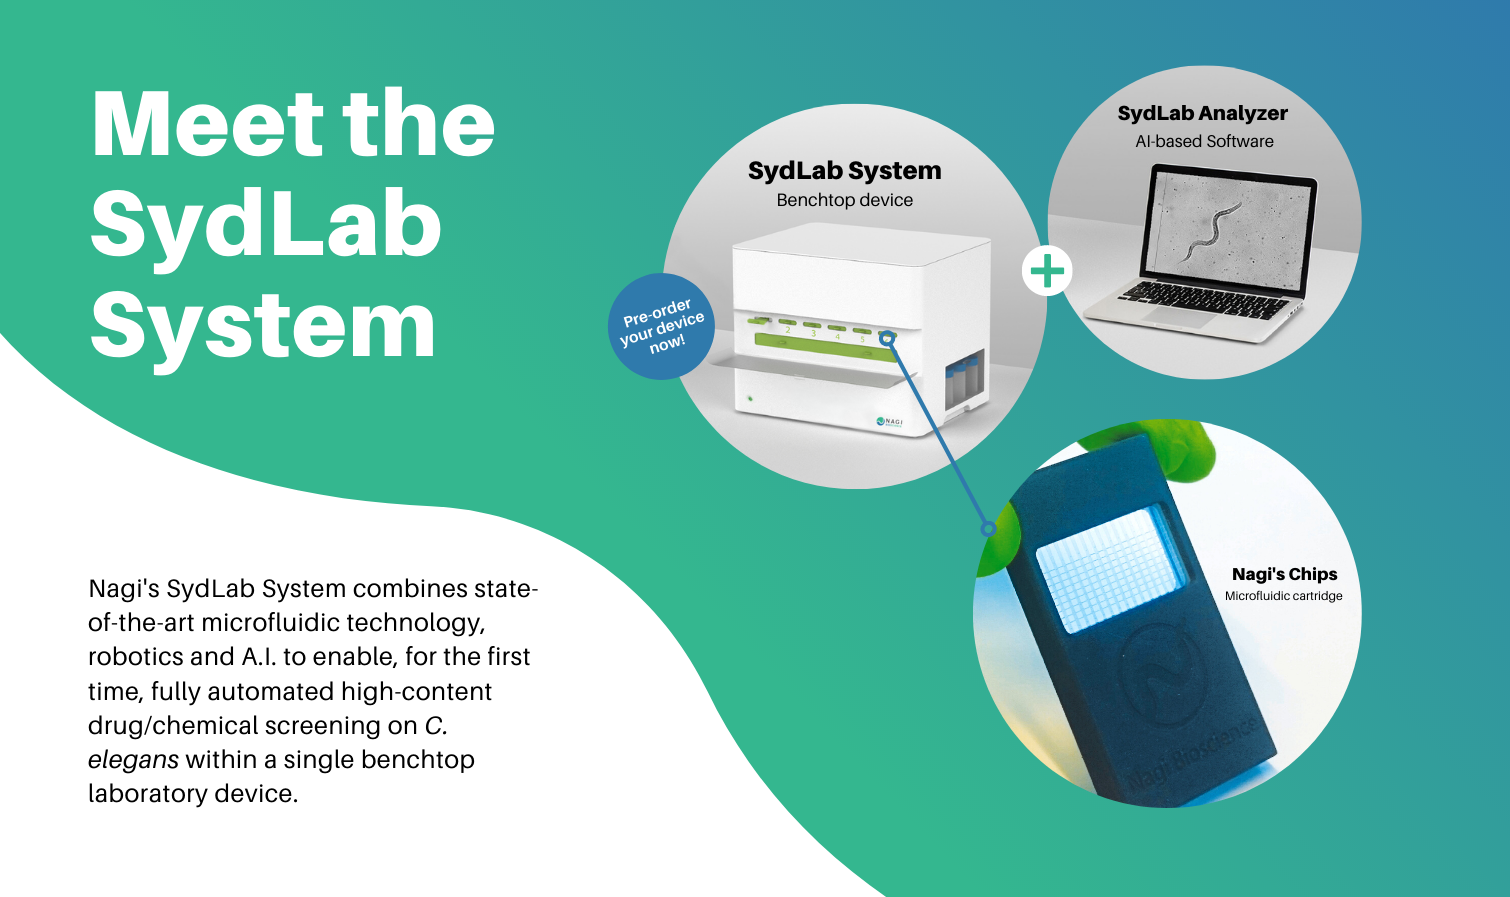 Sydlab System for fully automated drug and chemical screening